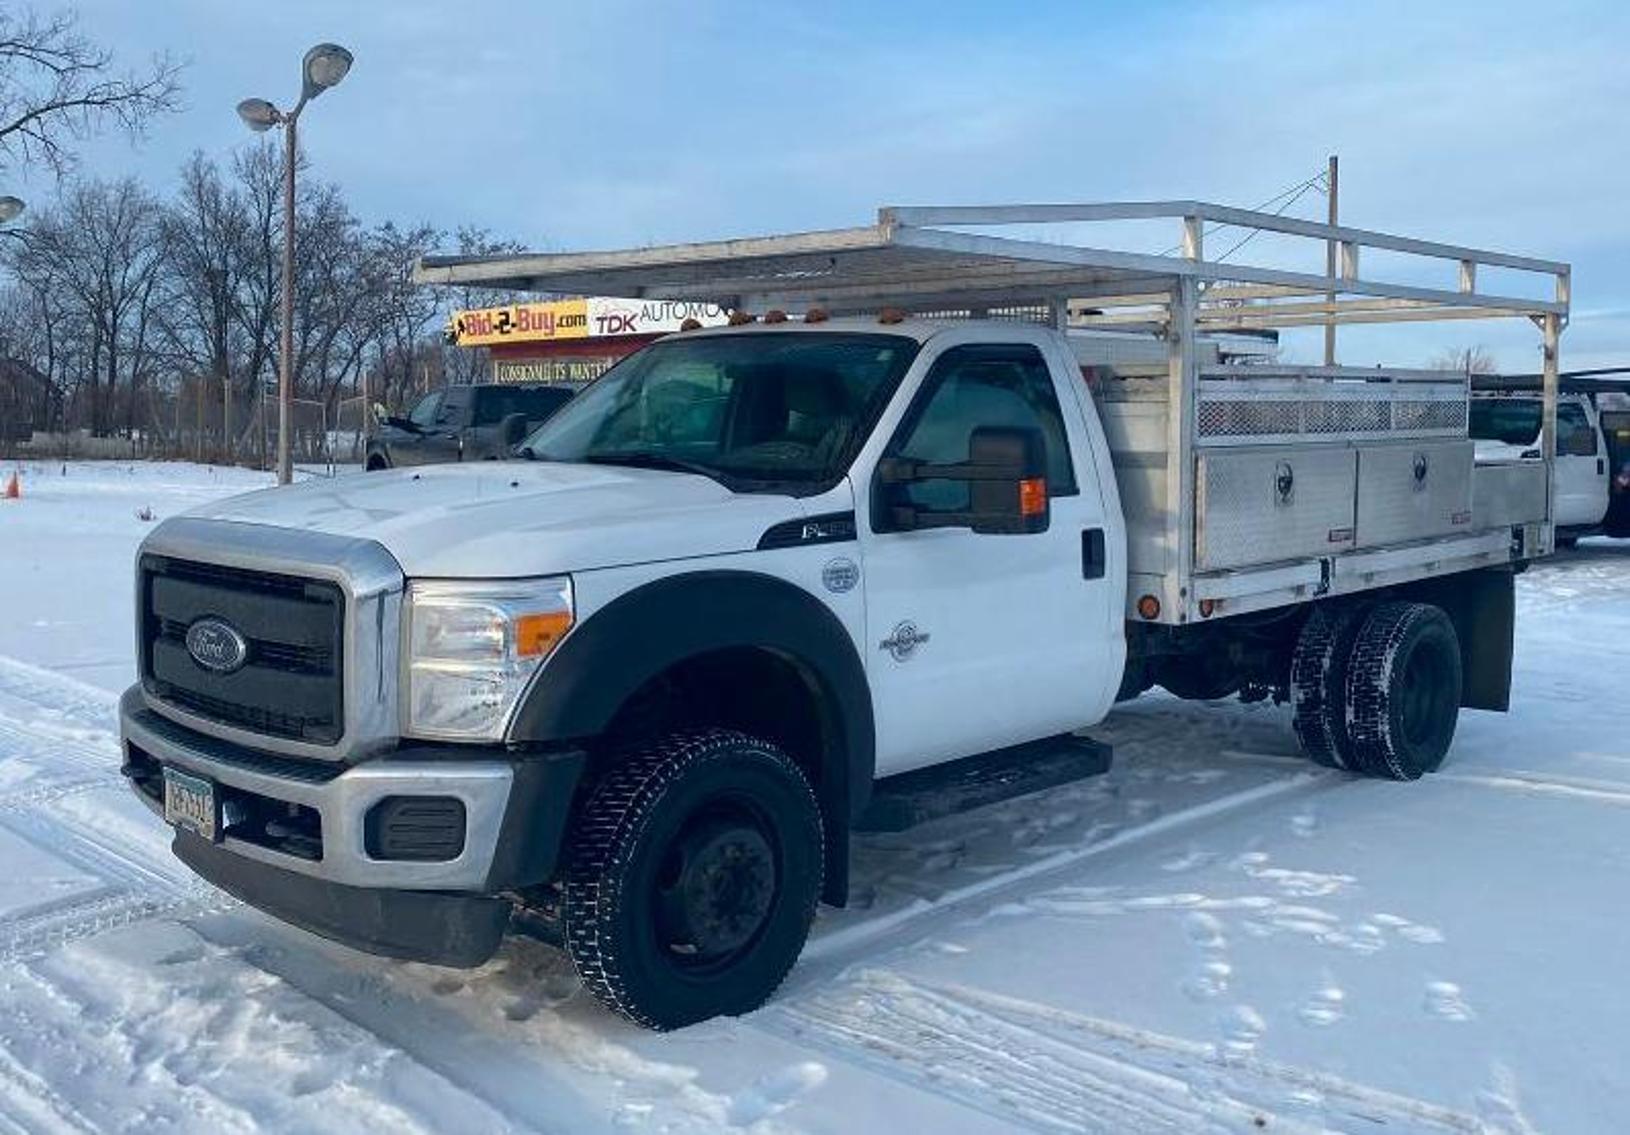 2016 & 2012 Ford F-450 Super Duty 4X4 Trucks With 12' Flatbeds